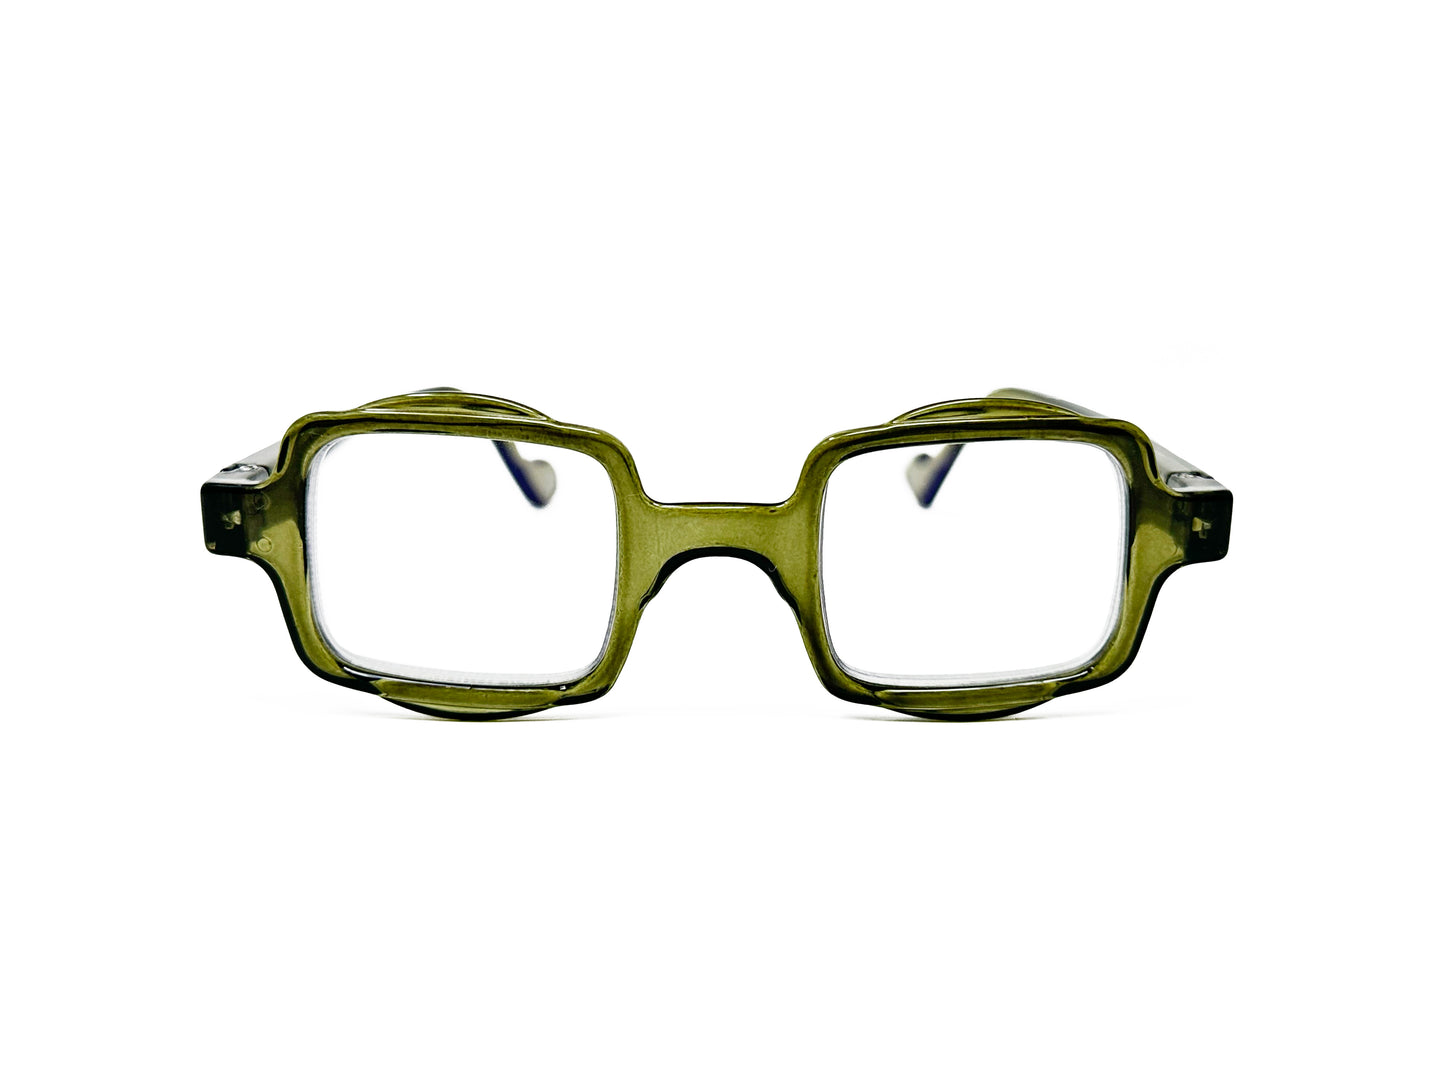 Aptica square reading glass with half-circle shape on top and bottom . Model: Hive. Color: Army Green - Semi-transparent. Front view. 